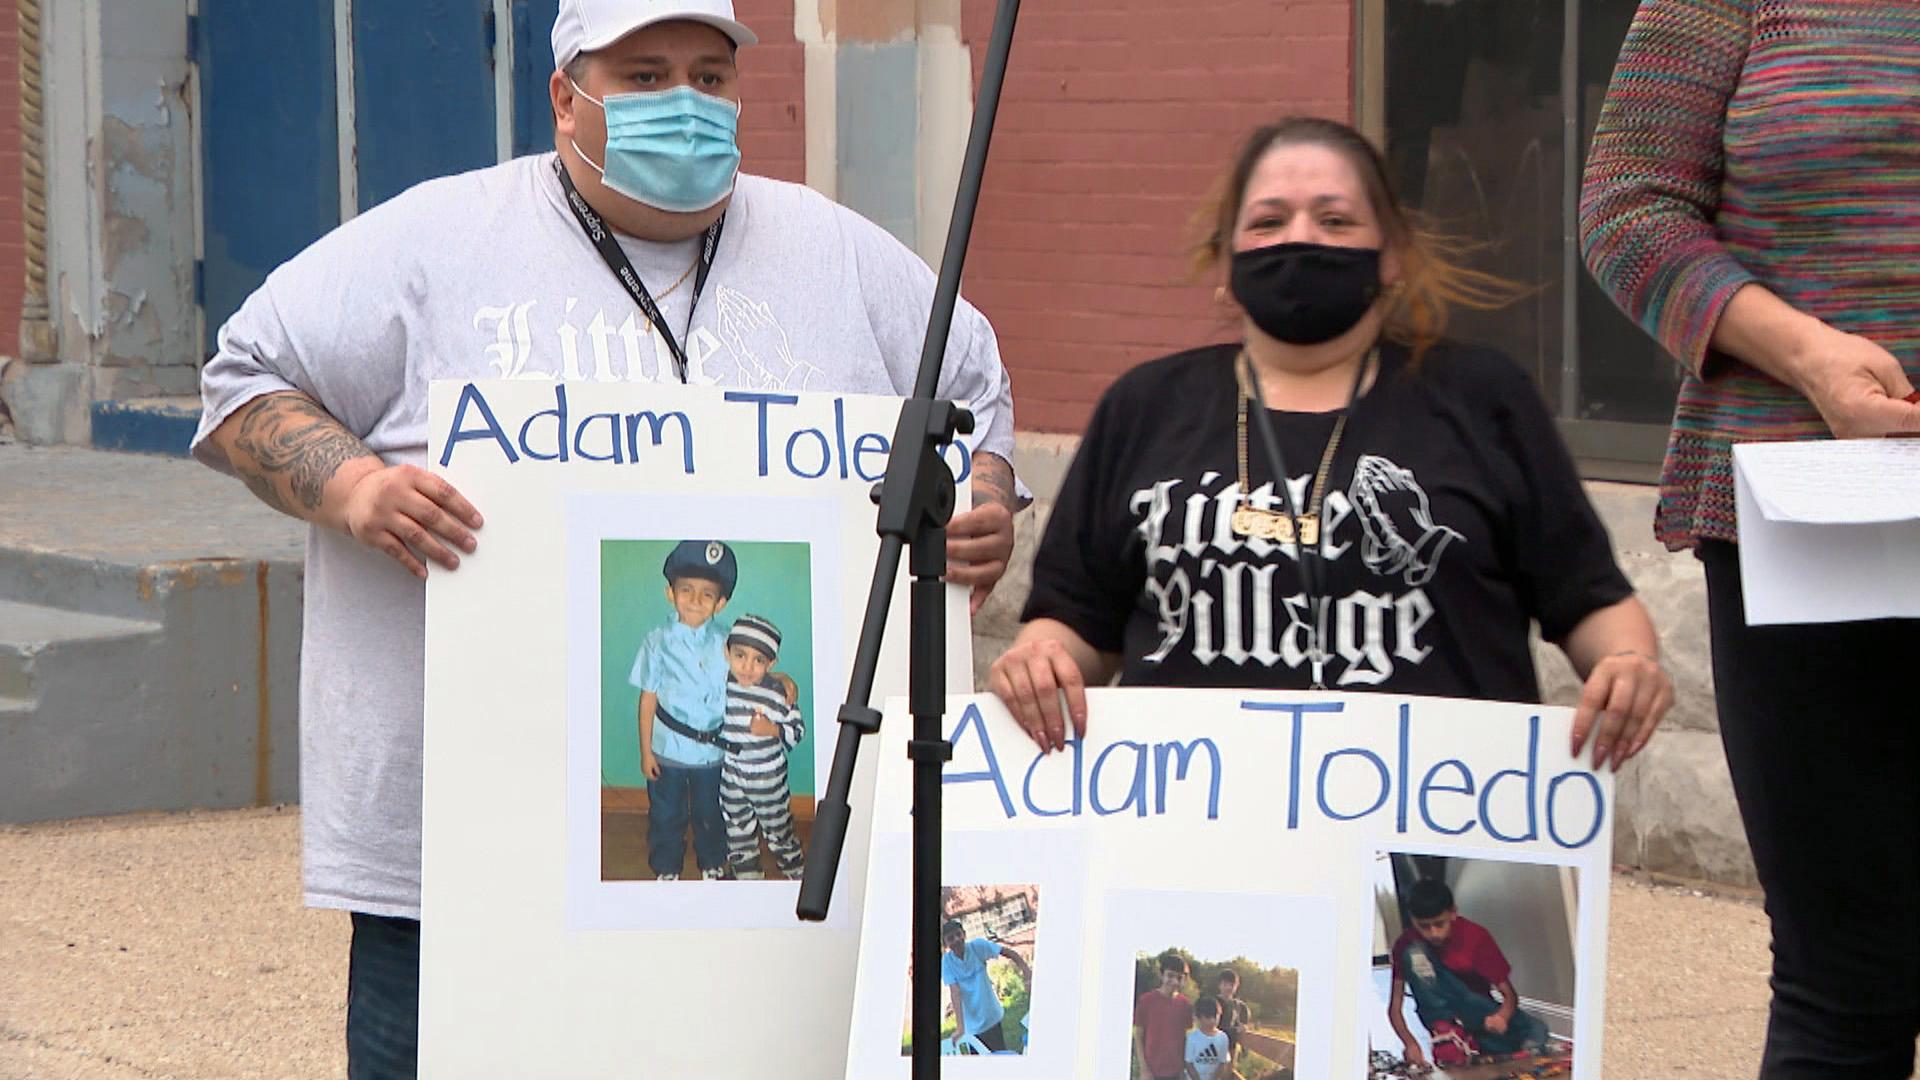 A vigil for Adam Toledo, the 13-year-old boy fatally shot by police on March 29, takes place in Little Village on Monday, April 5. (WTTW News)